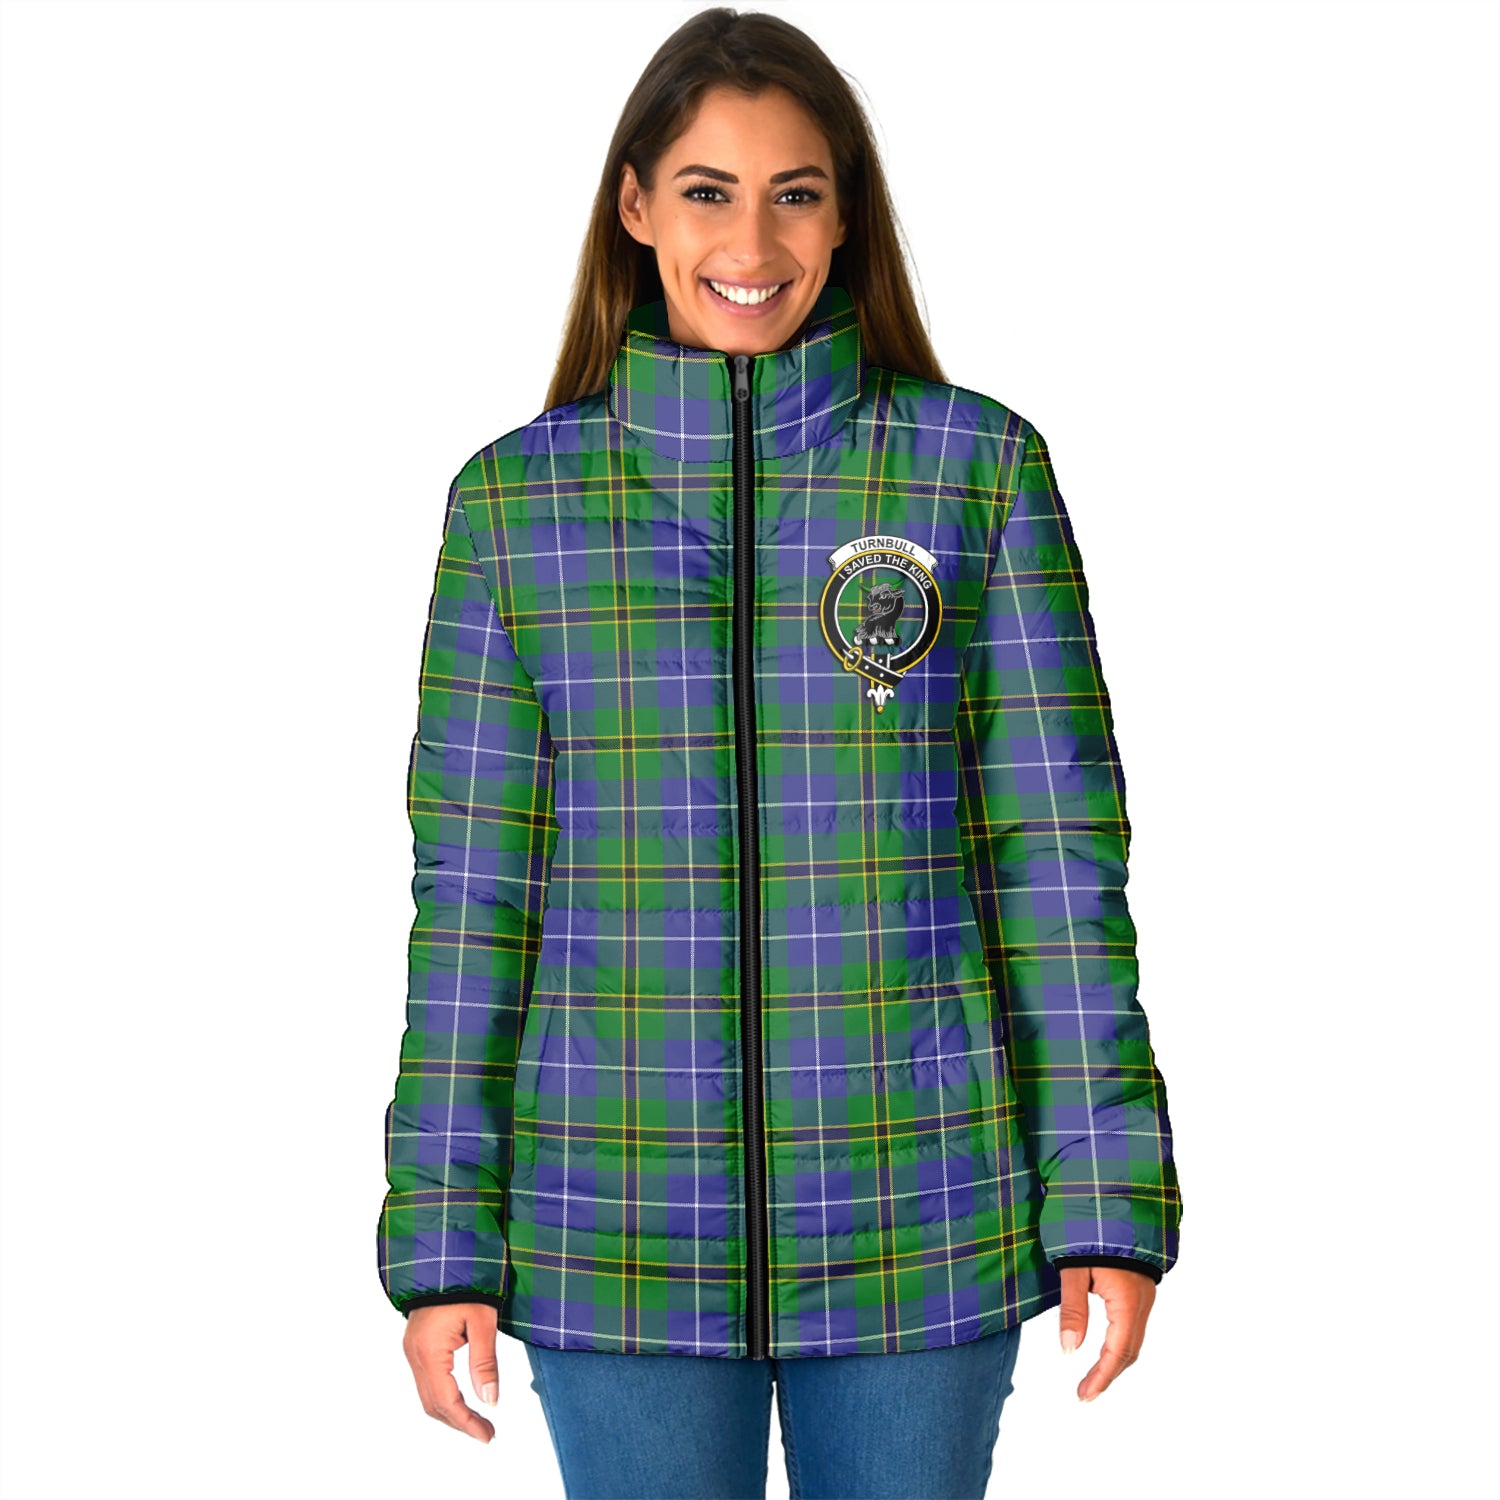 turnbull-hunting-tartan-padded-jacket-with-family-crest